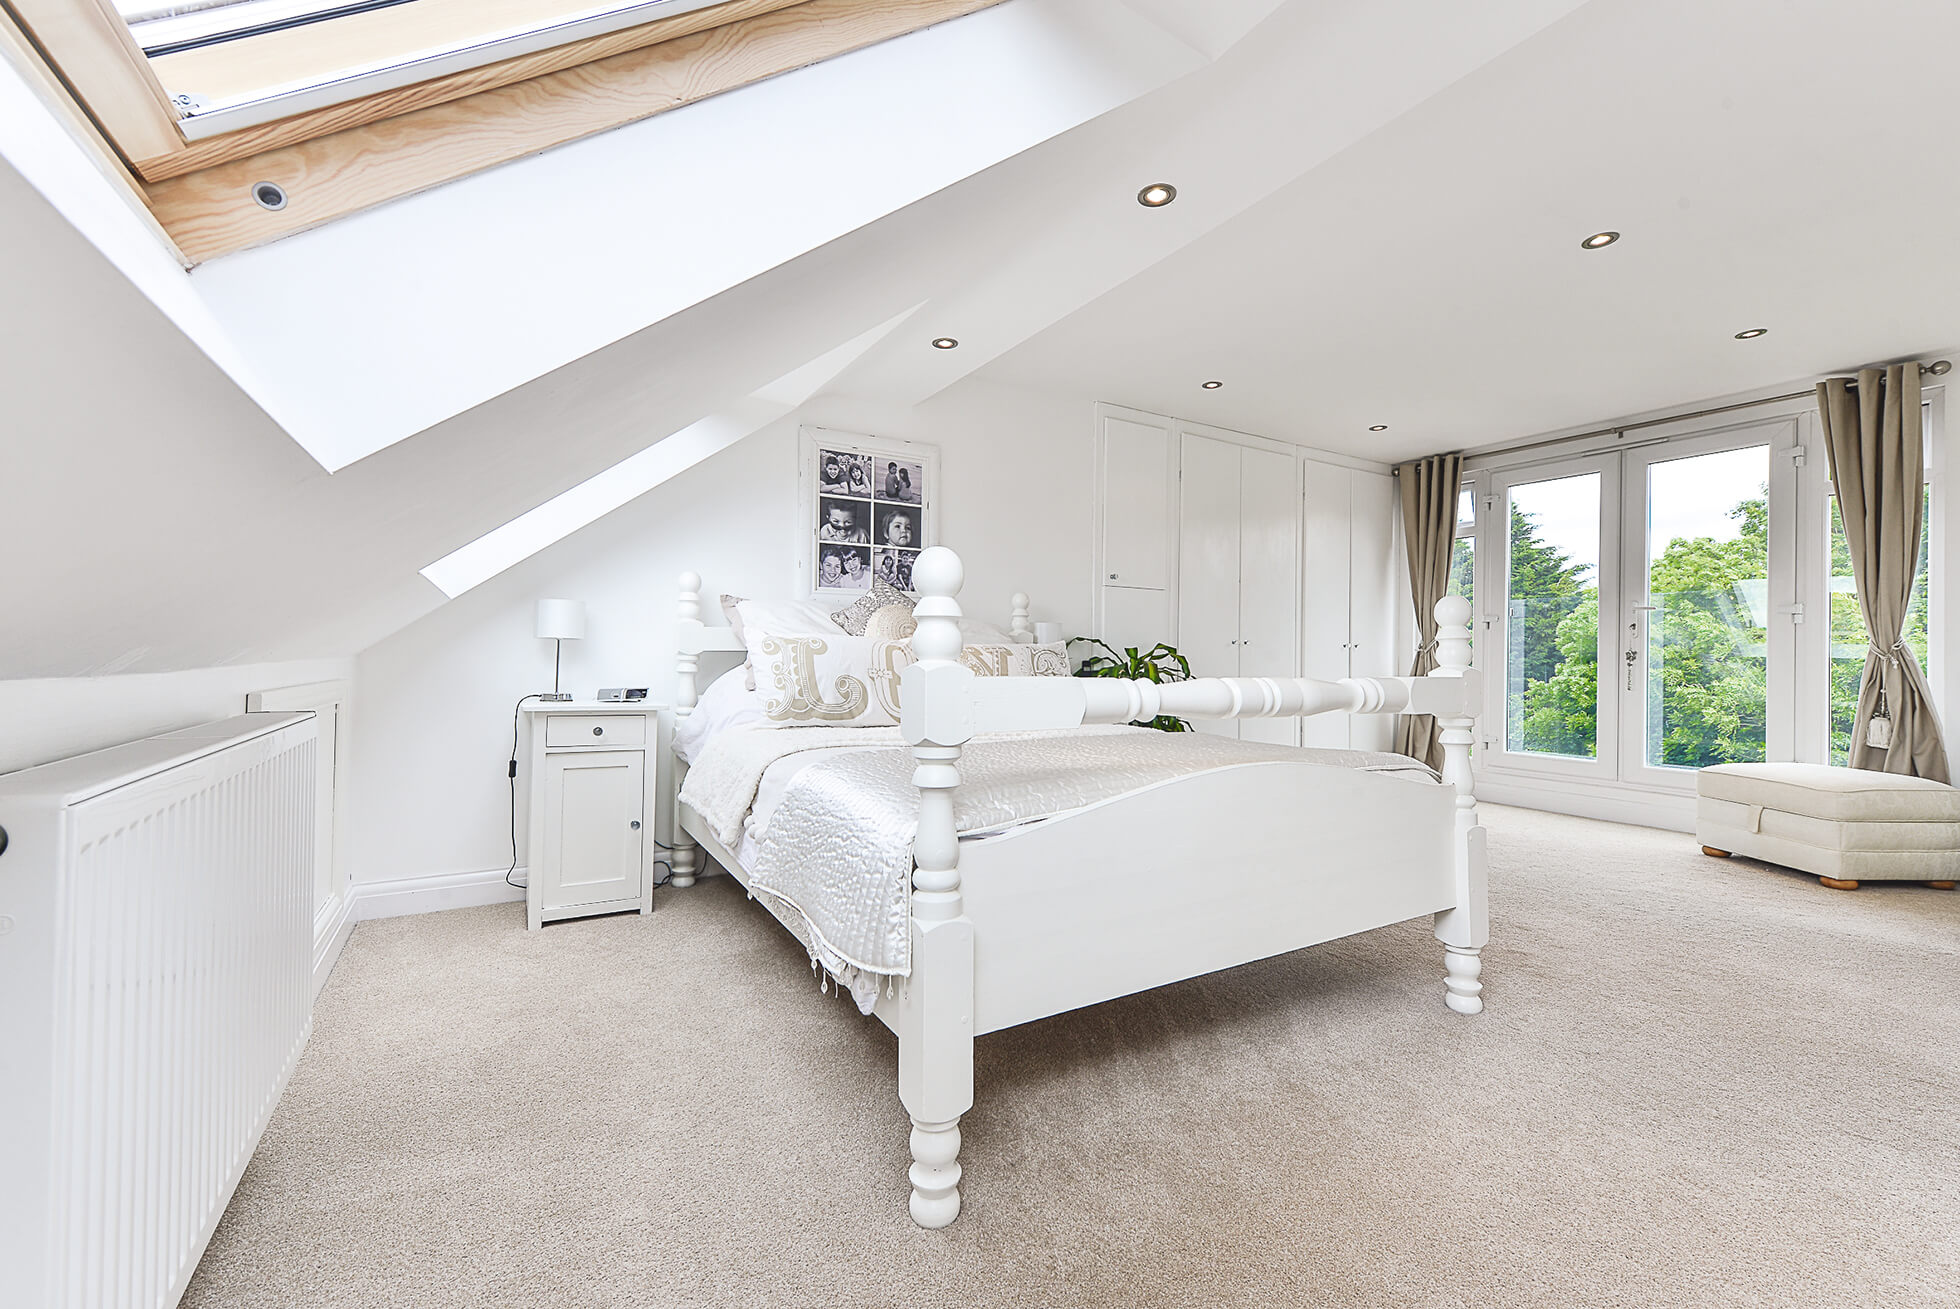 Do you have a question about converting your Loft in Wareside? Here are the most popular questions asked by our clients.